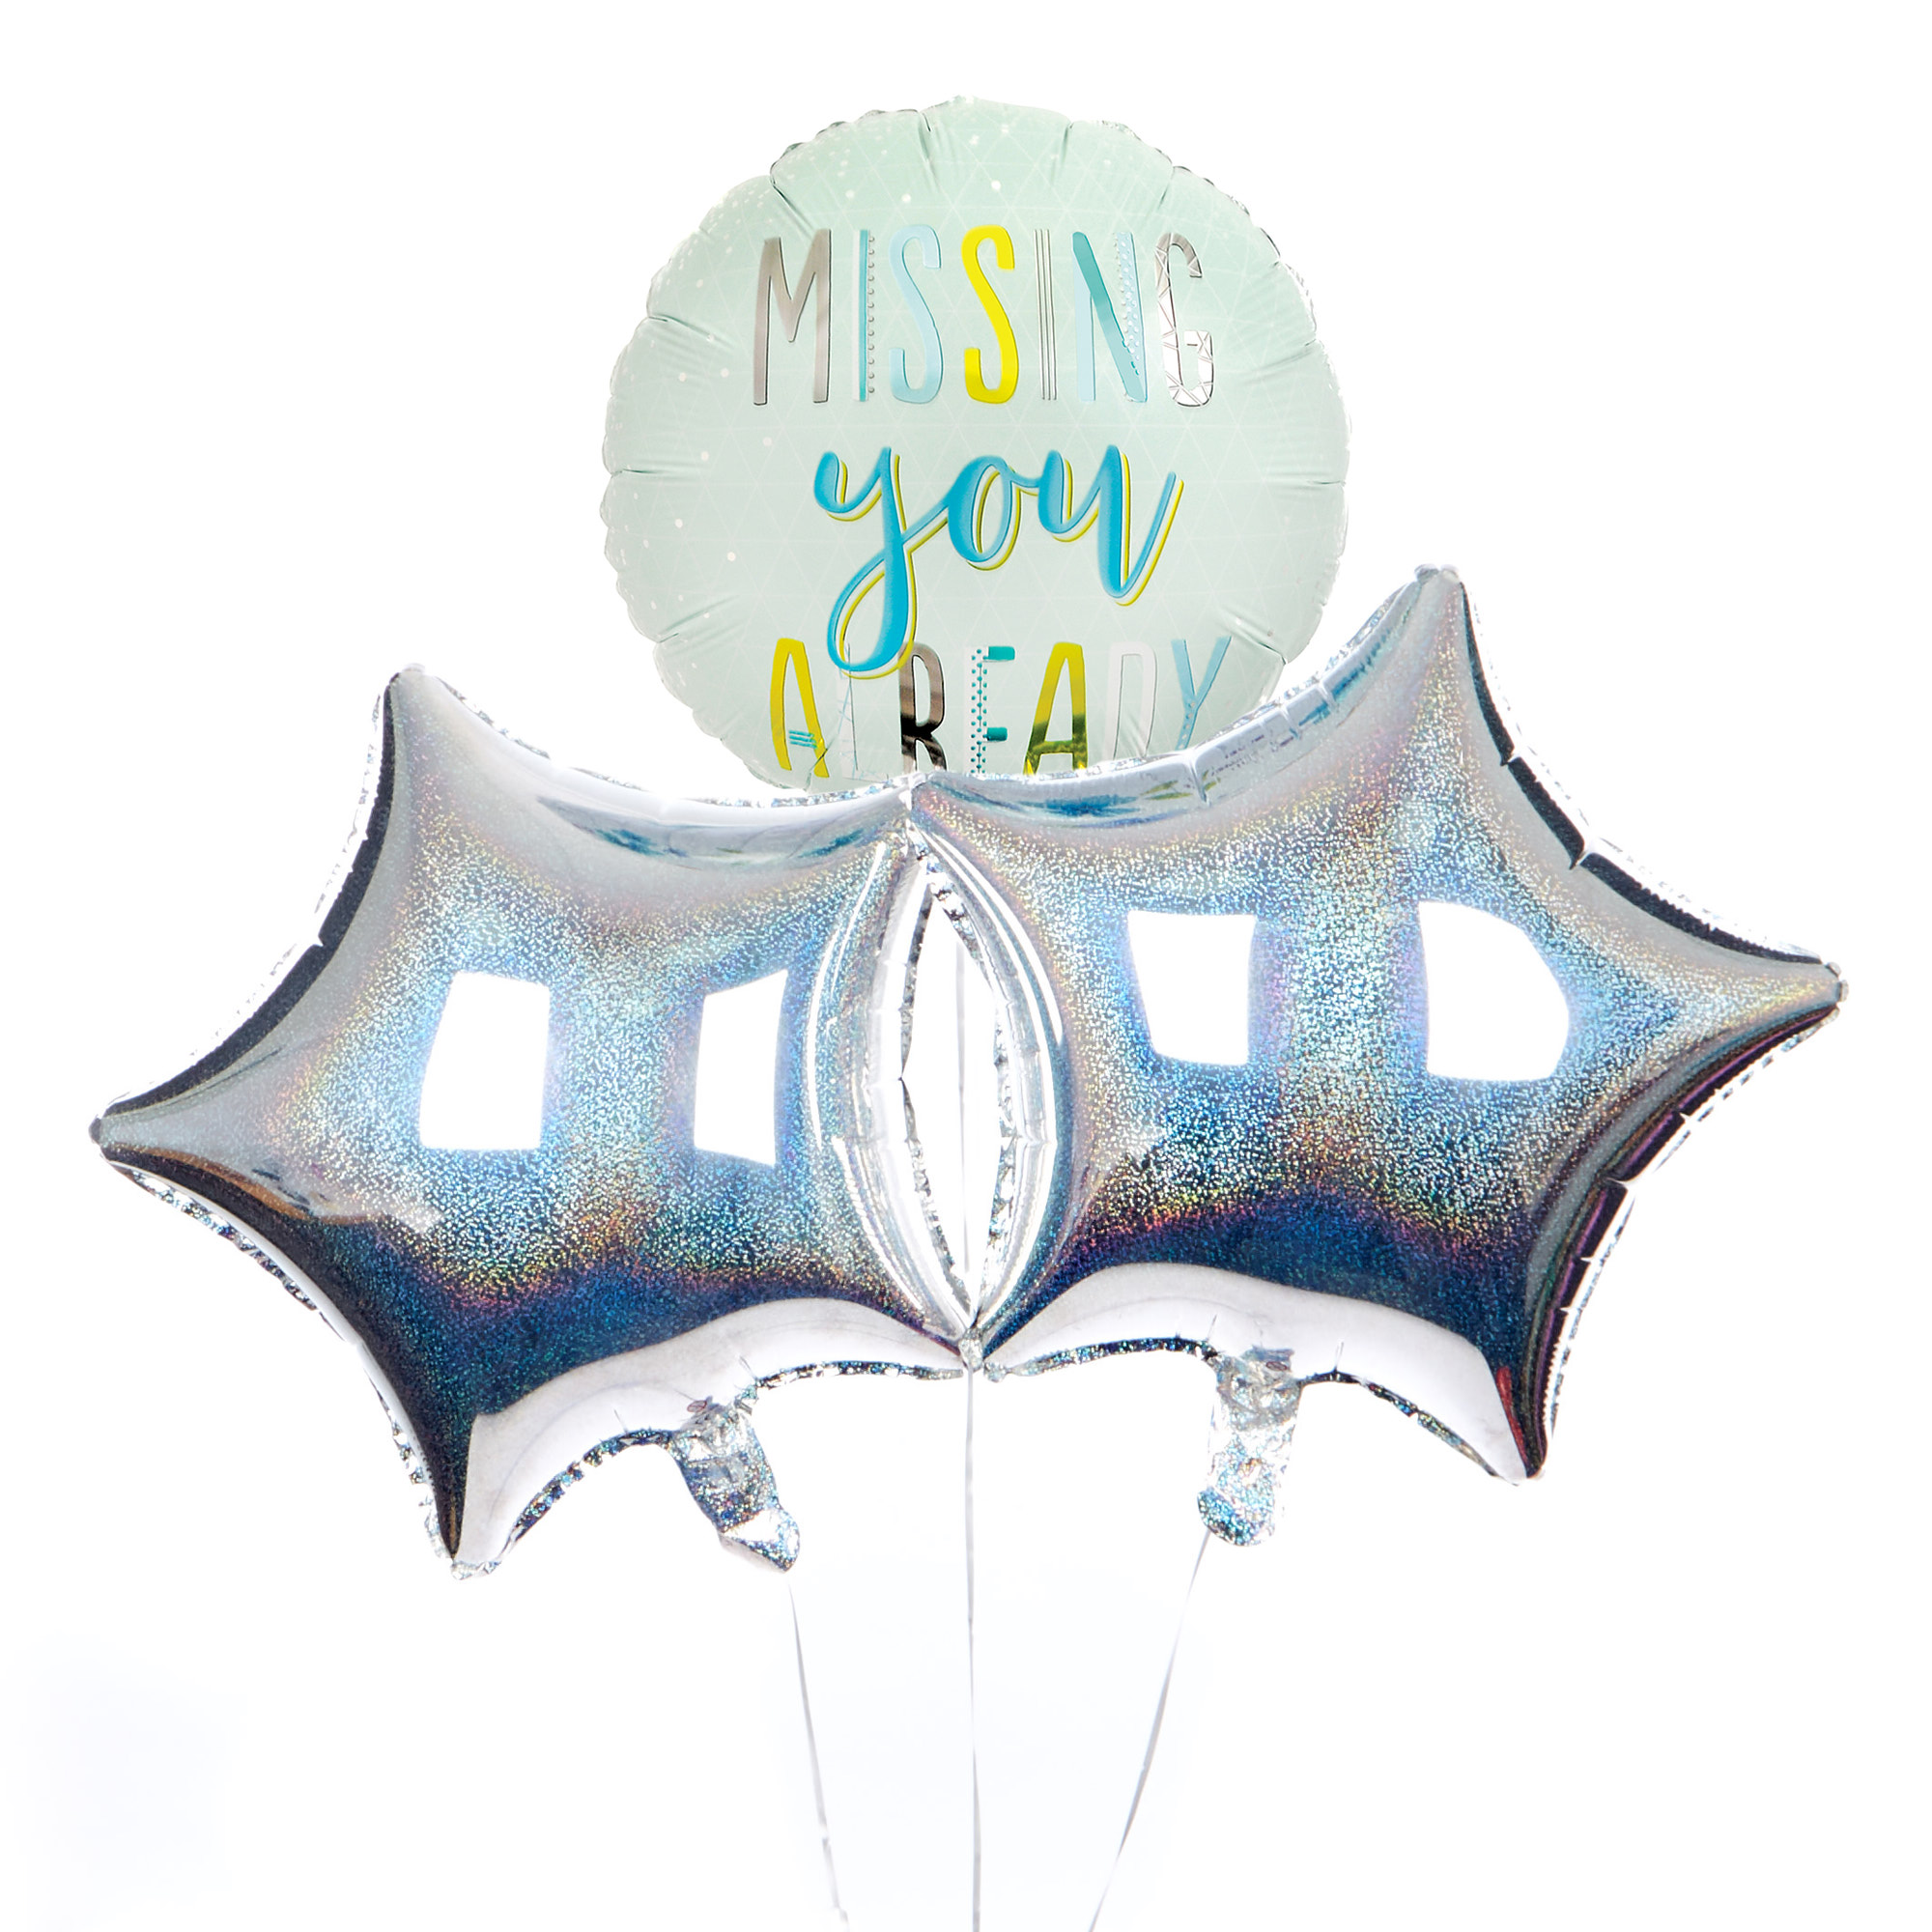 Missing You Already Balloon Bouquet - DELIVERED INFLATED!